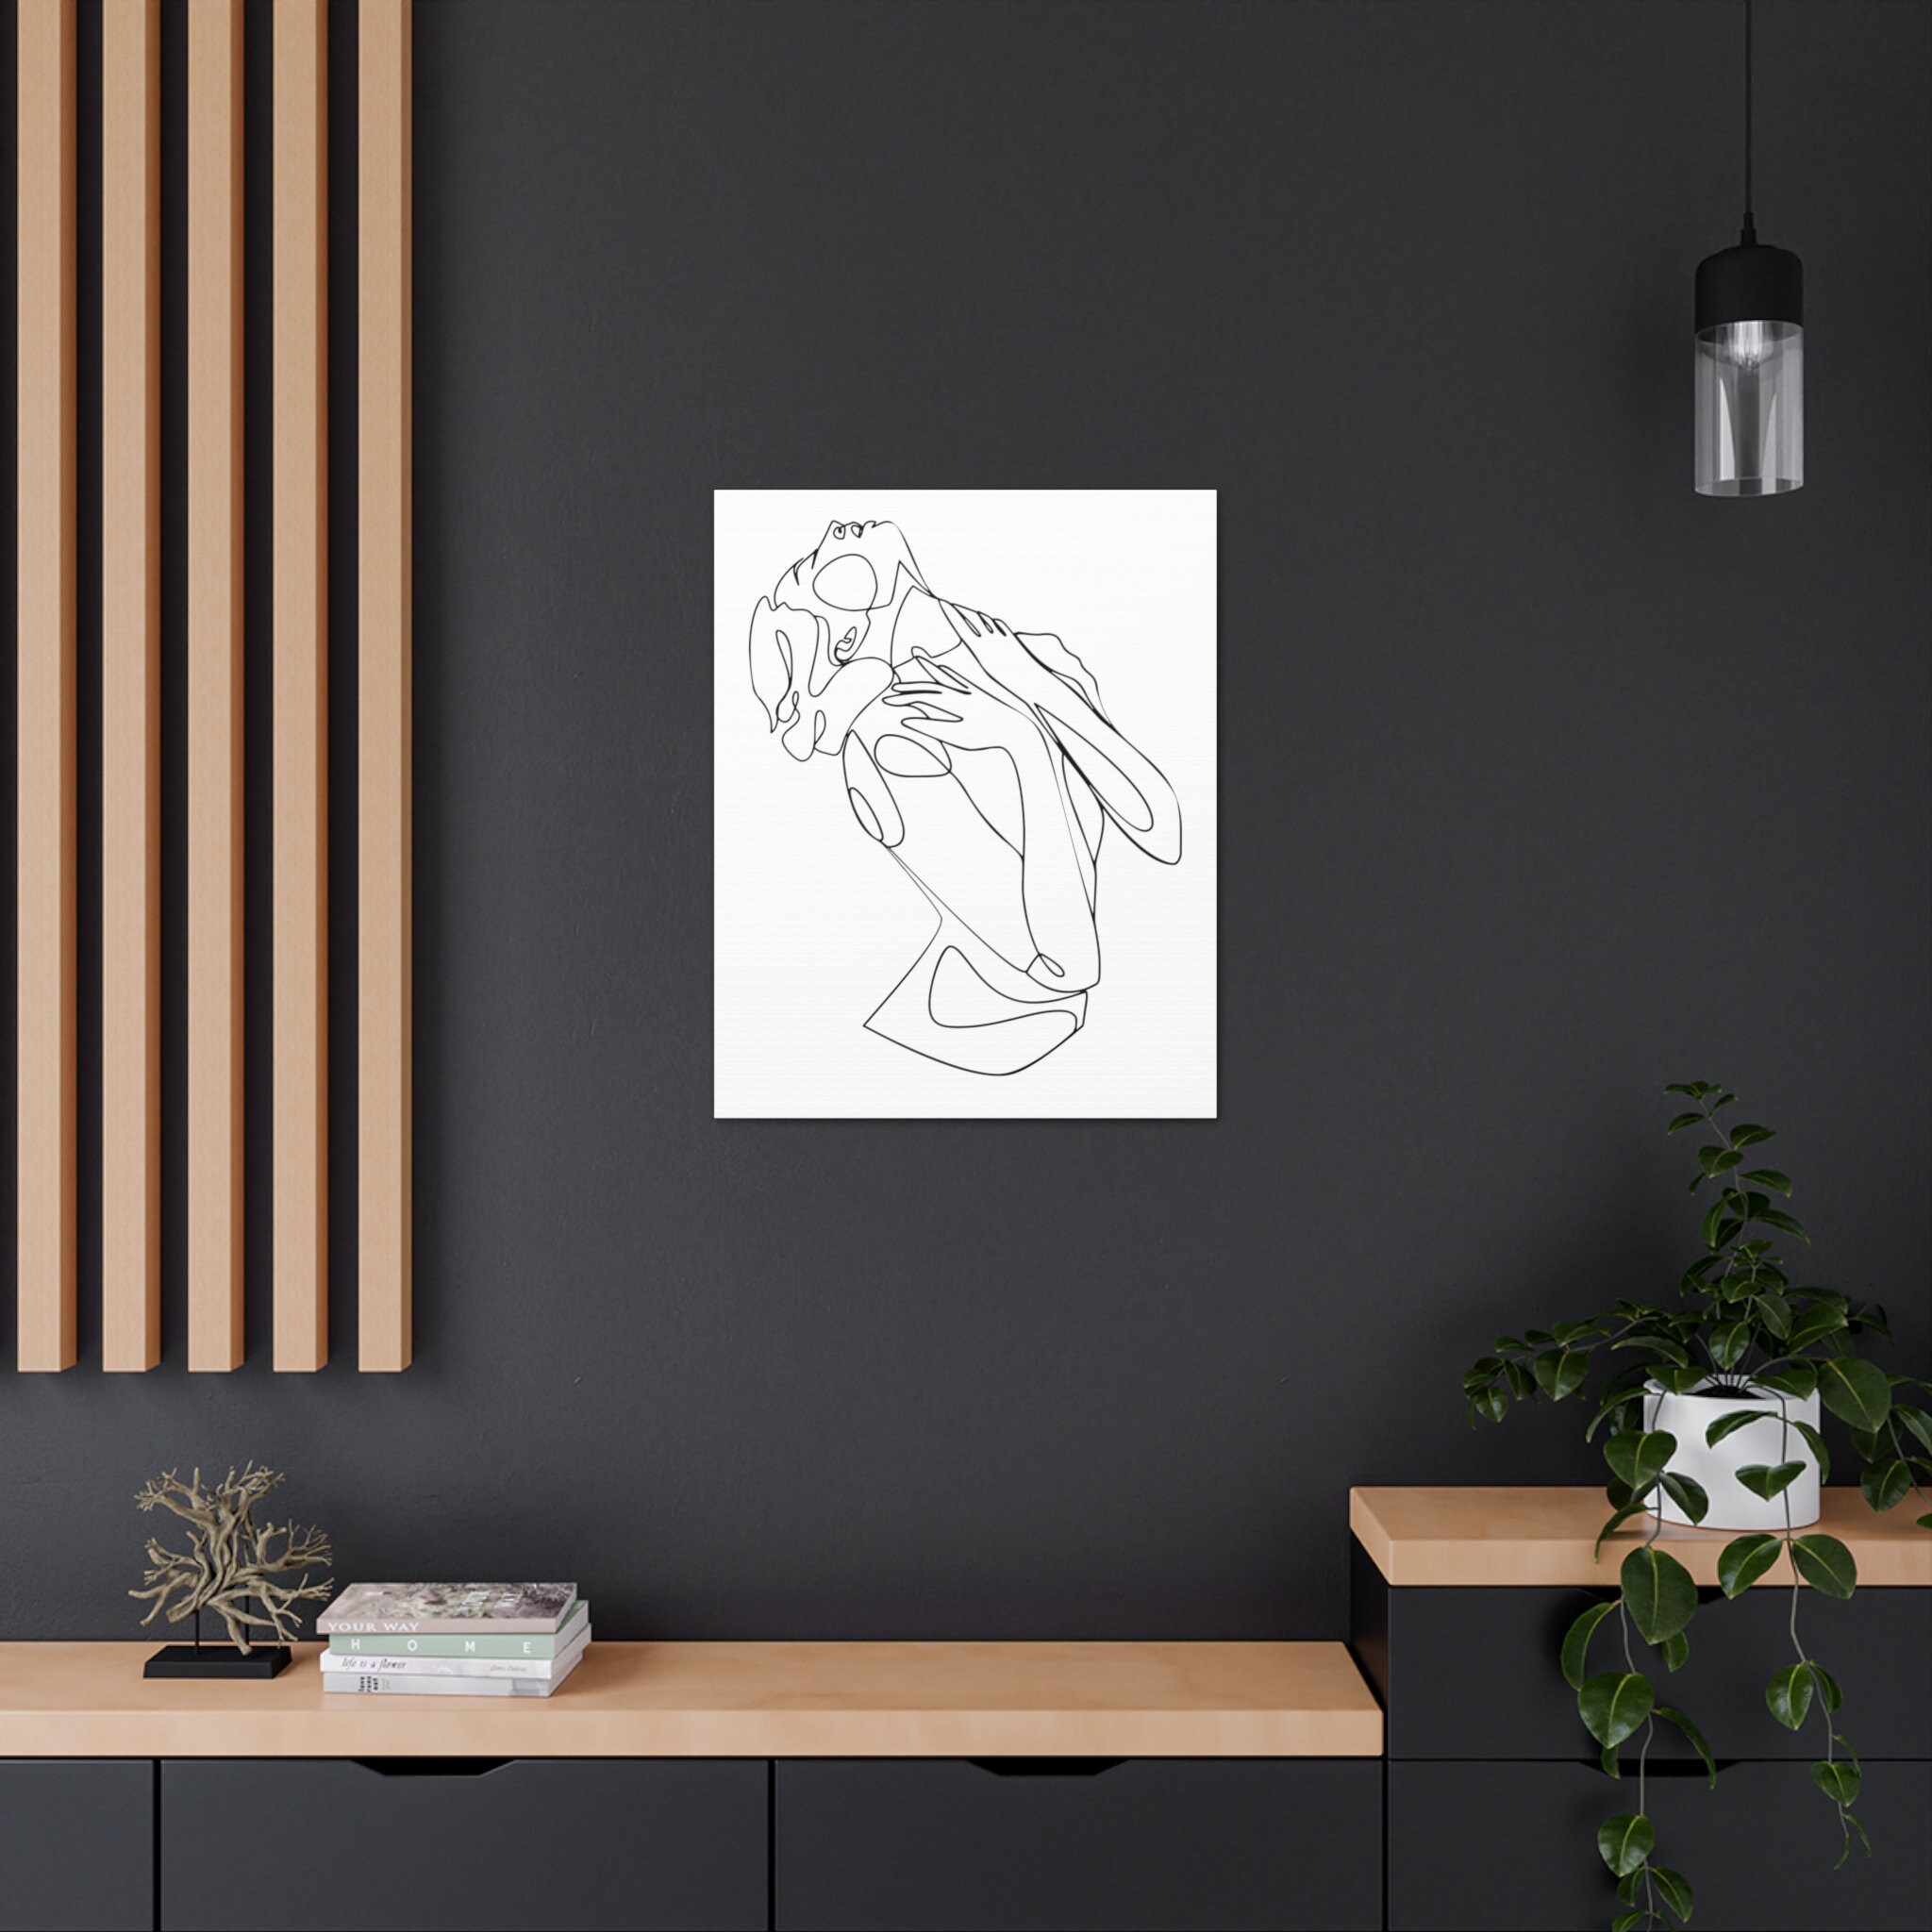 Line Art Woman Drawing Wall Poster